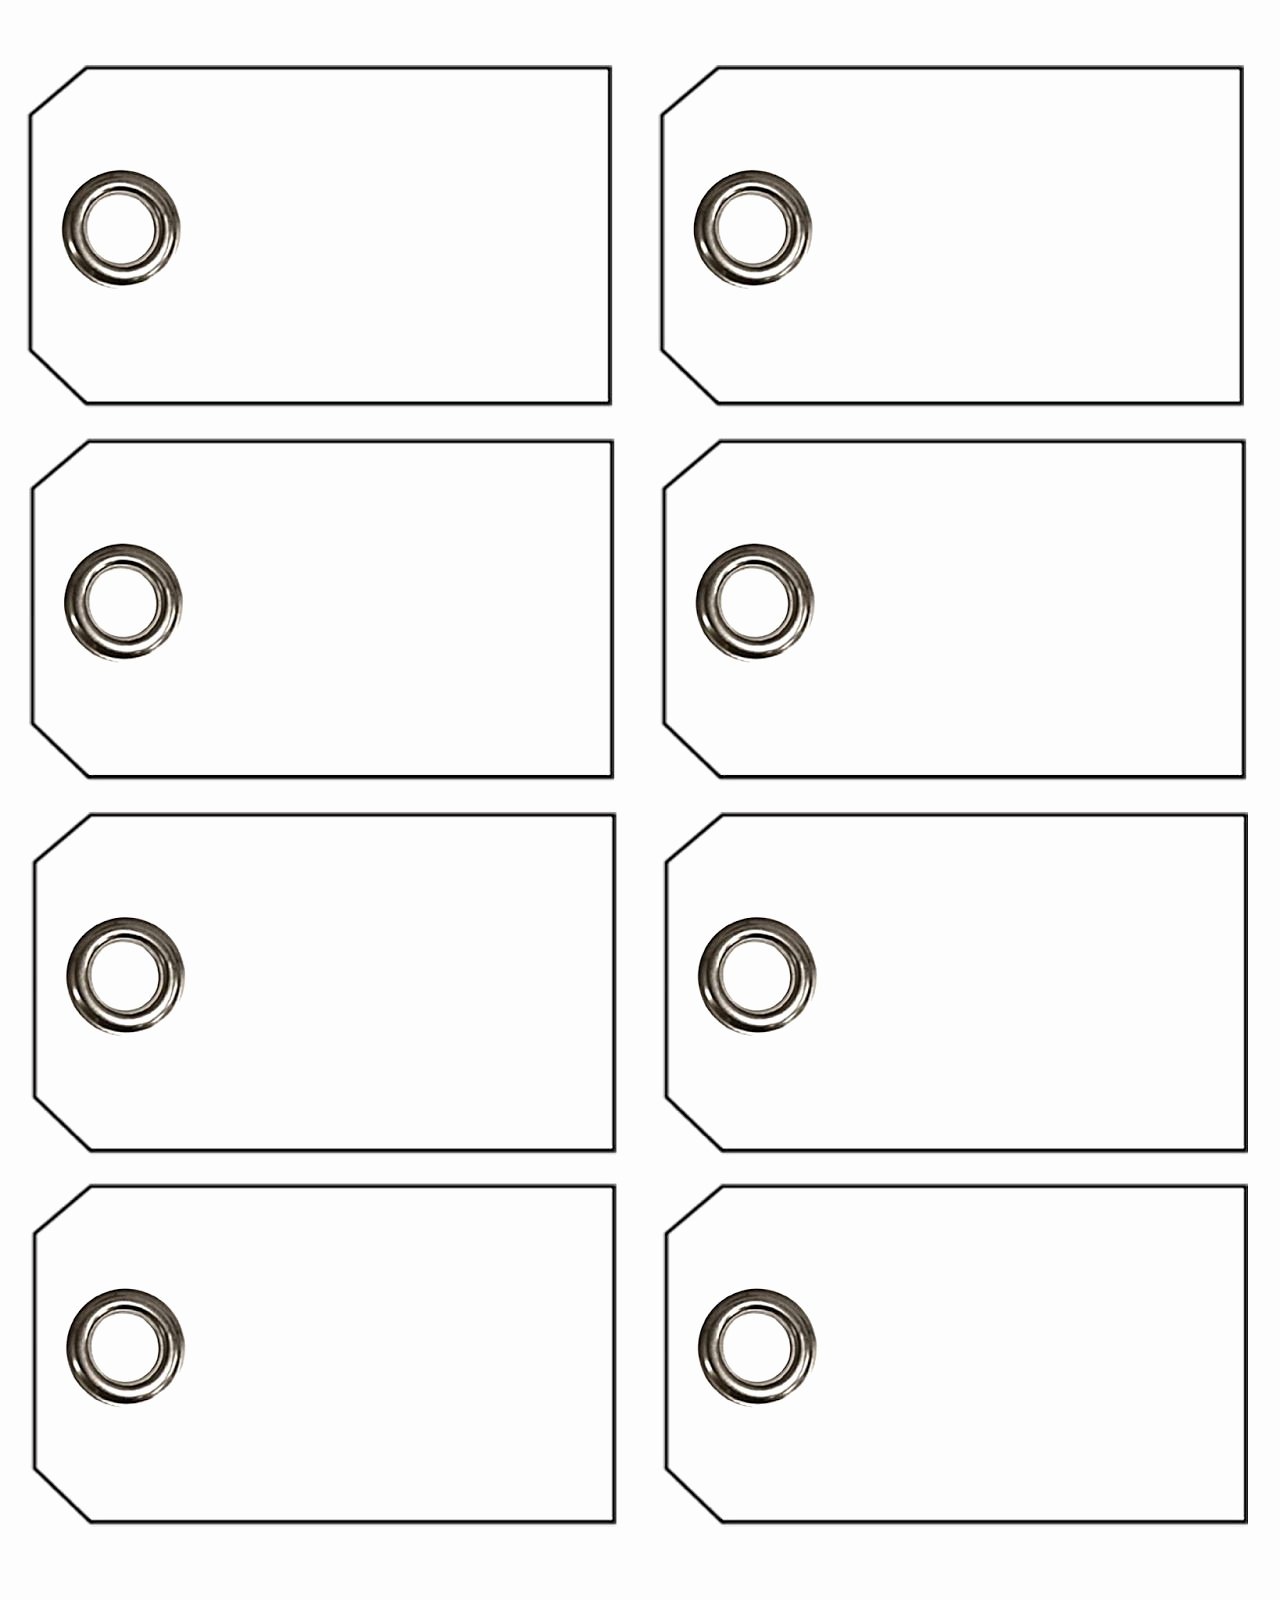 Price Tag Template Printable Fresh Blank Price Tags Printable Gift Tags with Eyelets S3rfbuxr